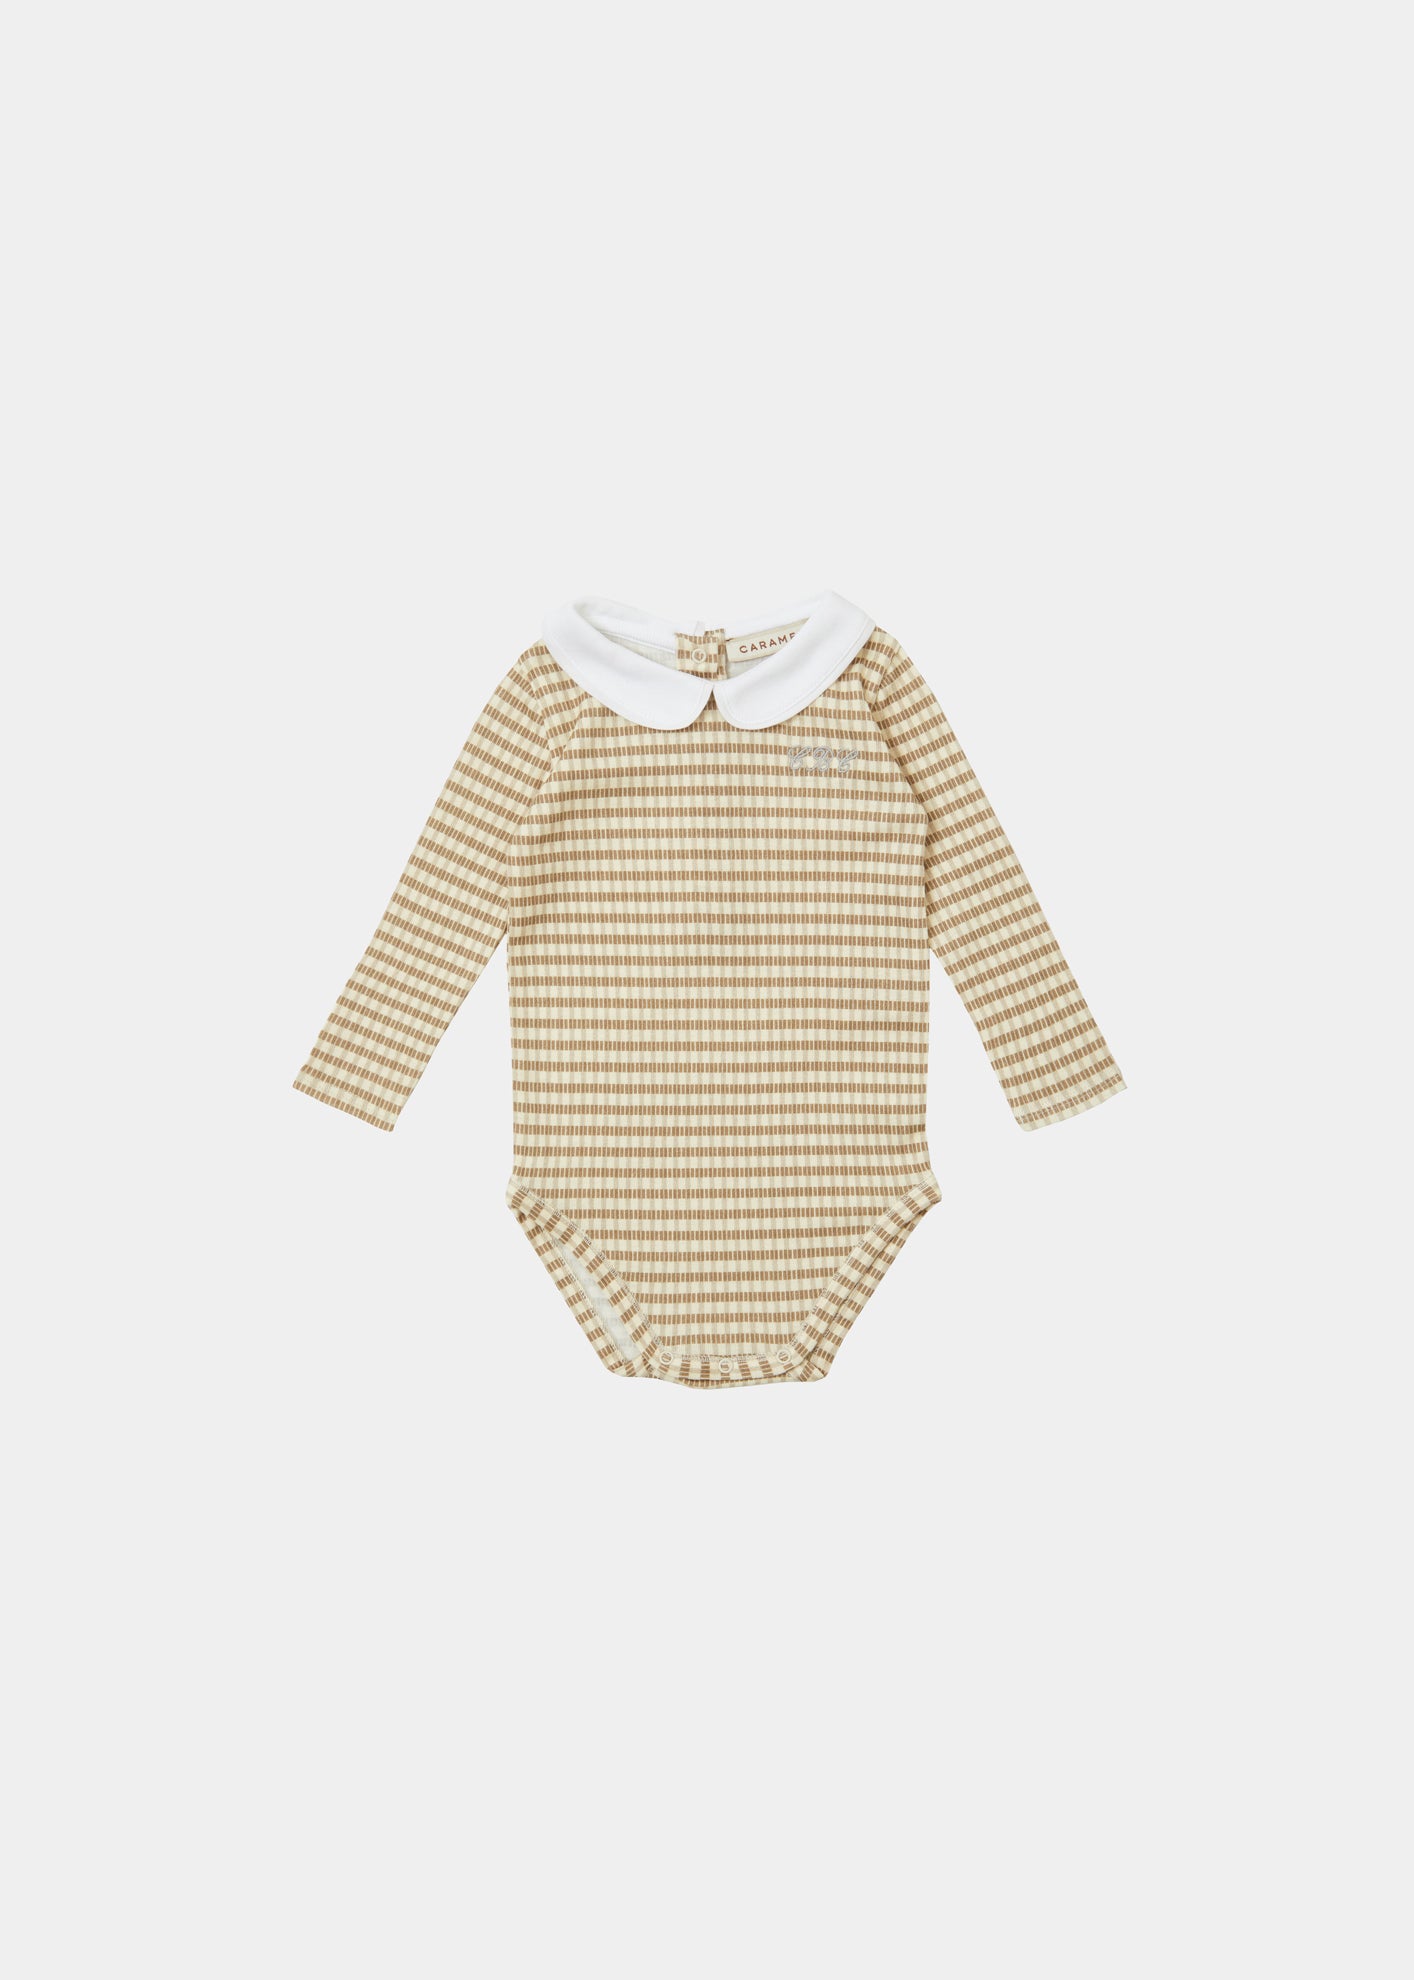 LIMPET BABY GIFTING ROMPER - CHECK PRINT